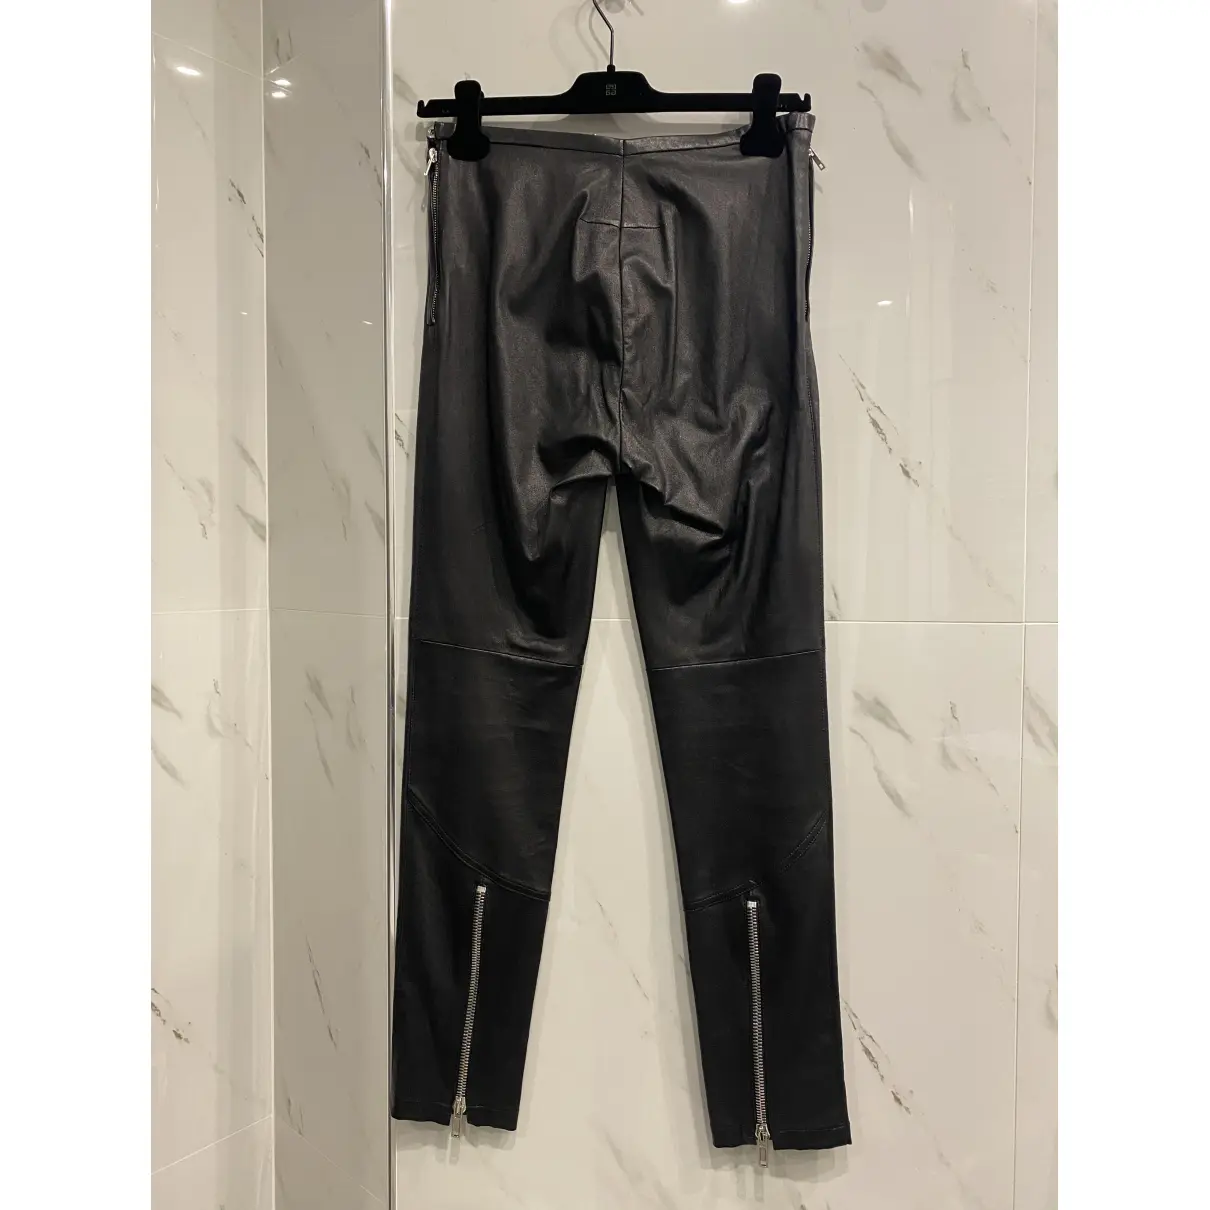 Buy Givenchy Leather straight pants online